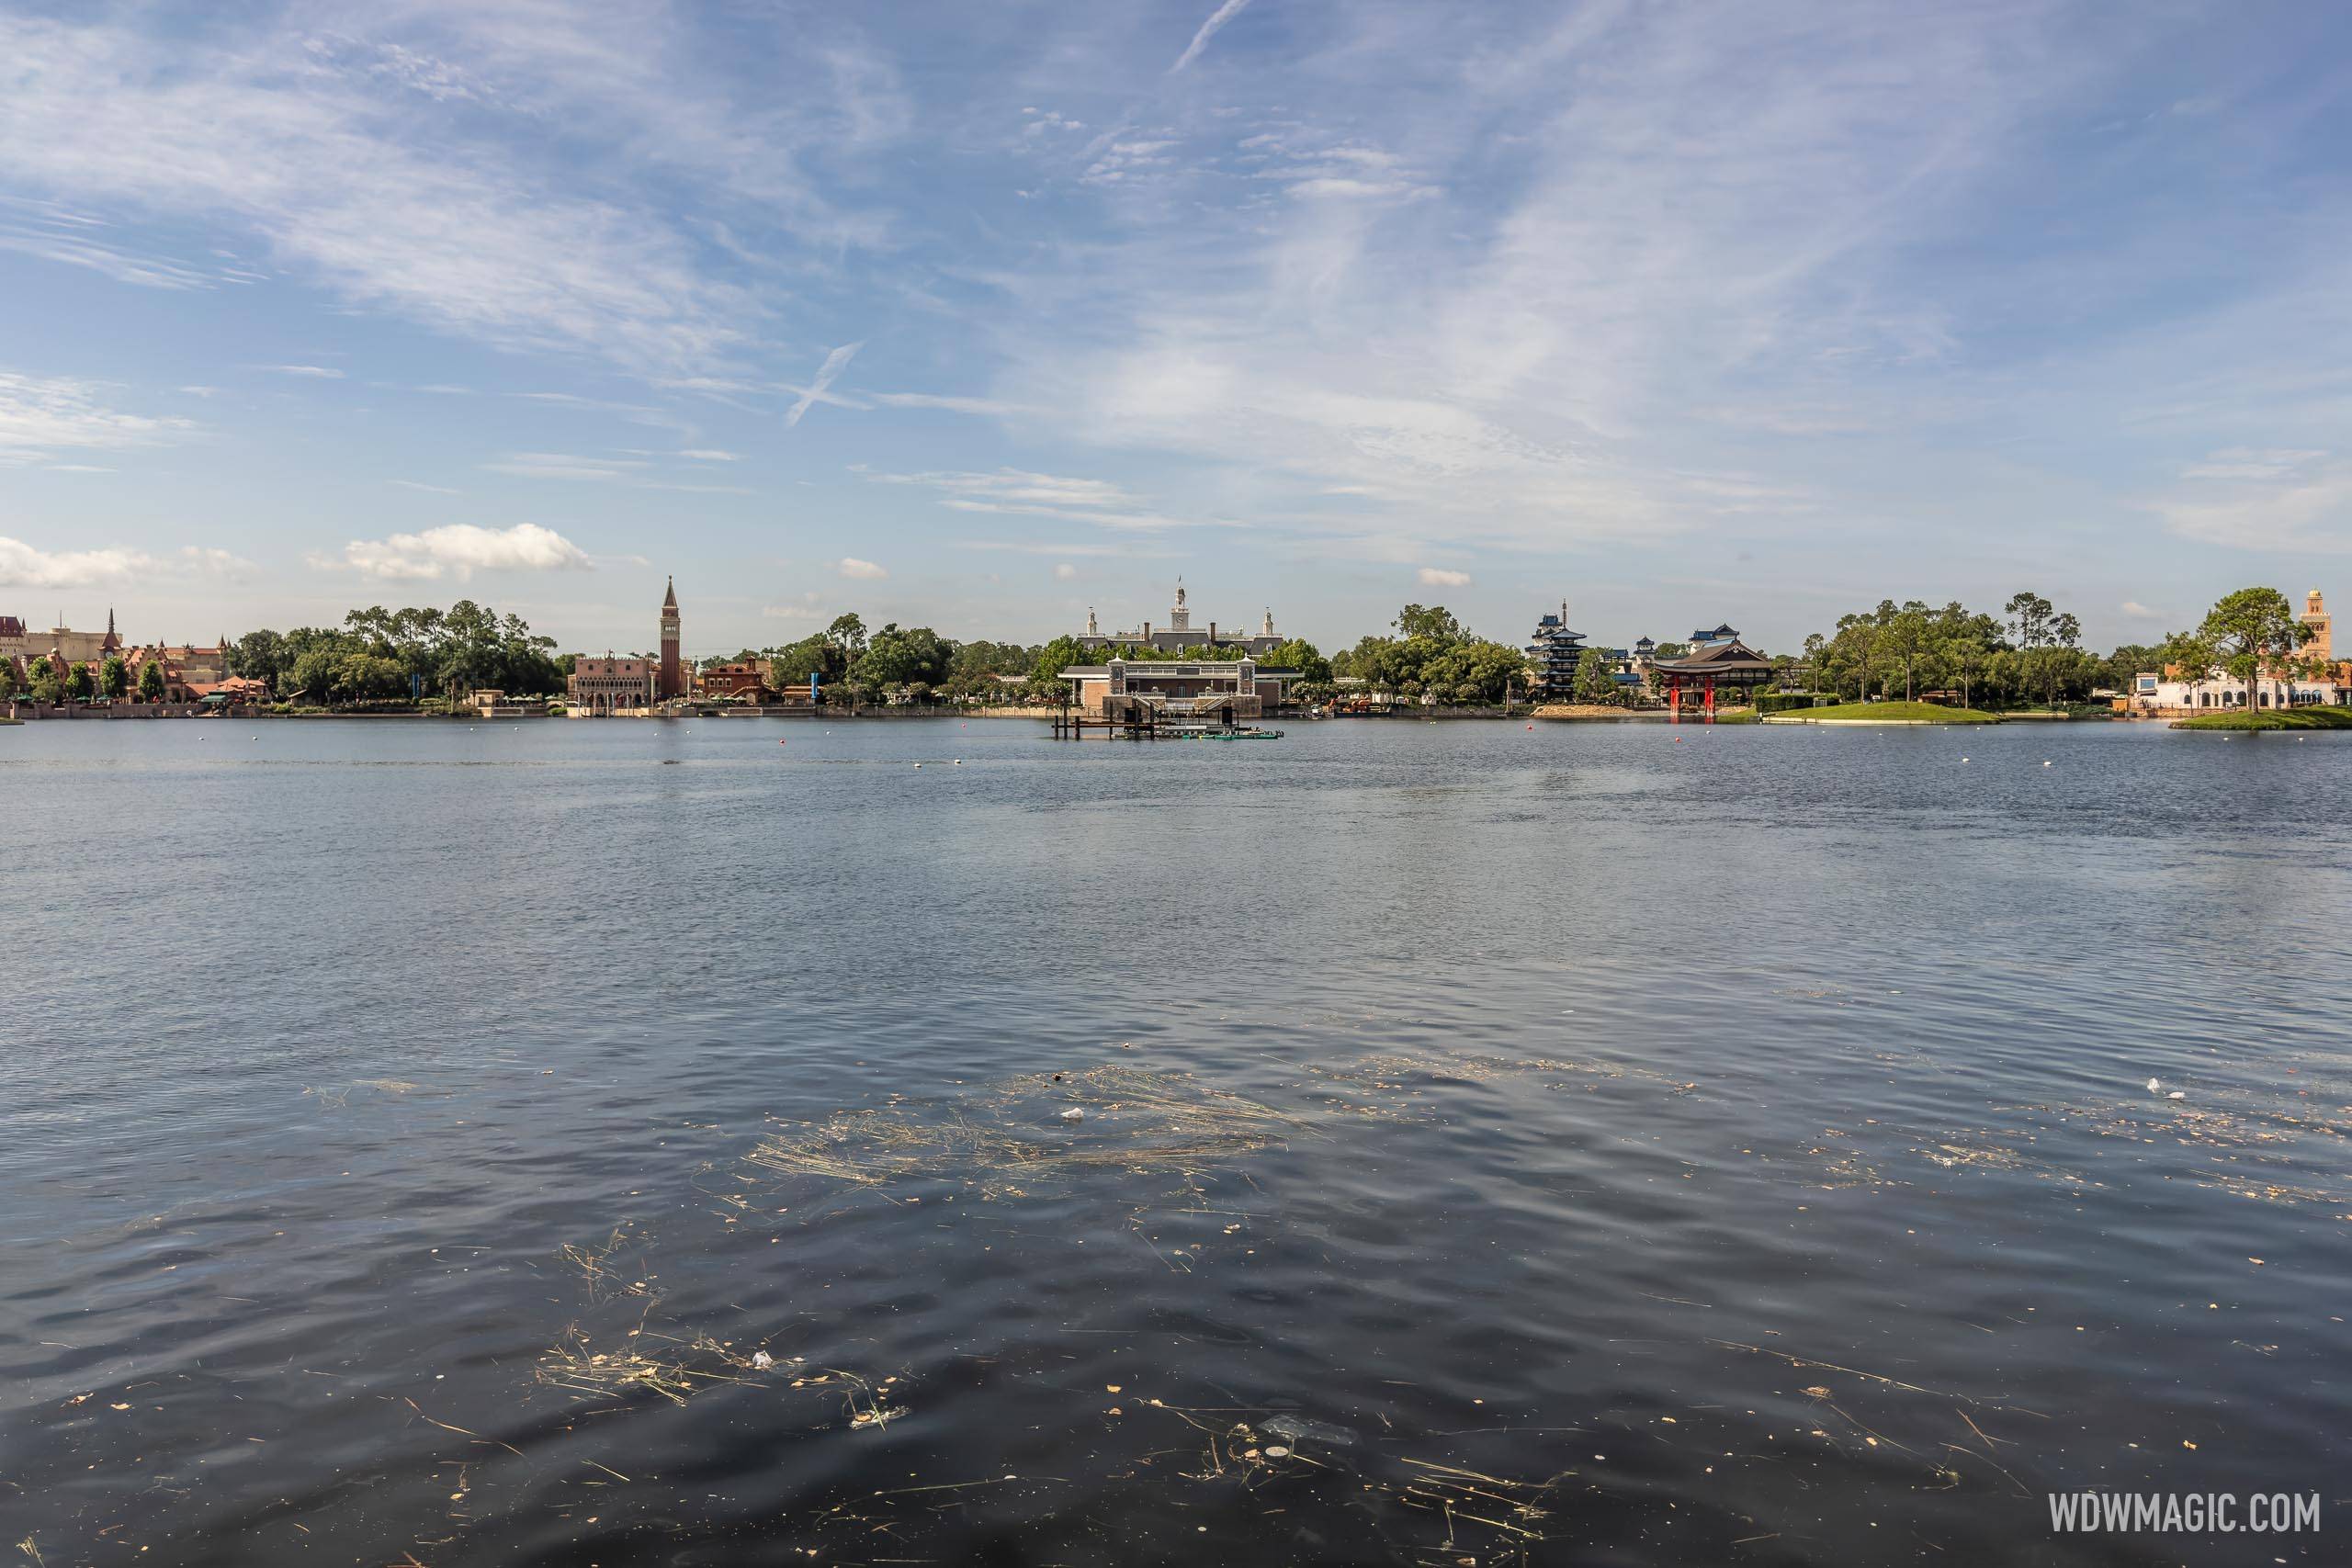 New pilings in World Showcase Lagoon as preparations for EPCOT's new nighttime spectacular continue